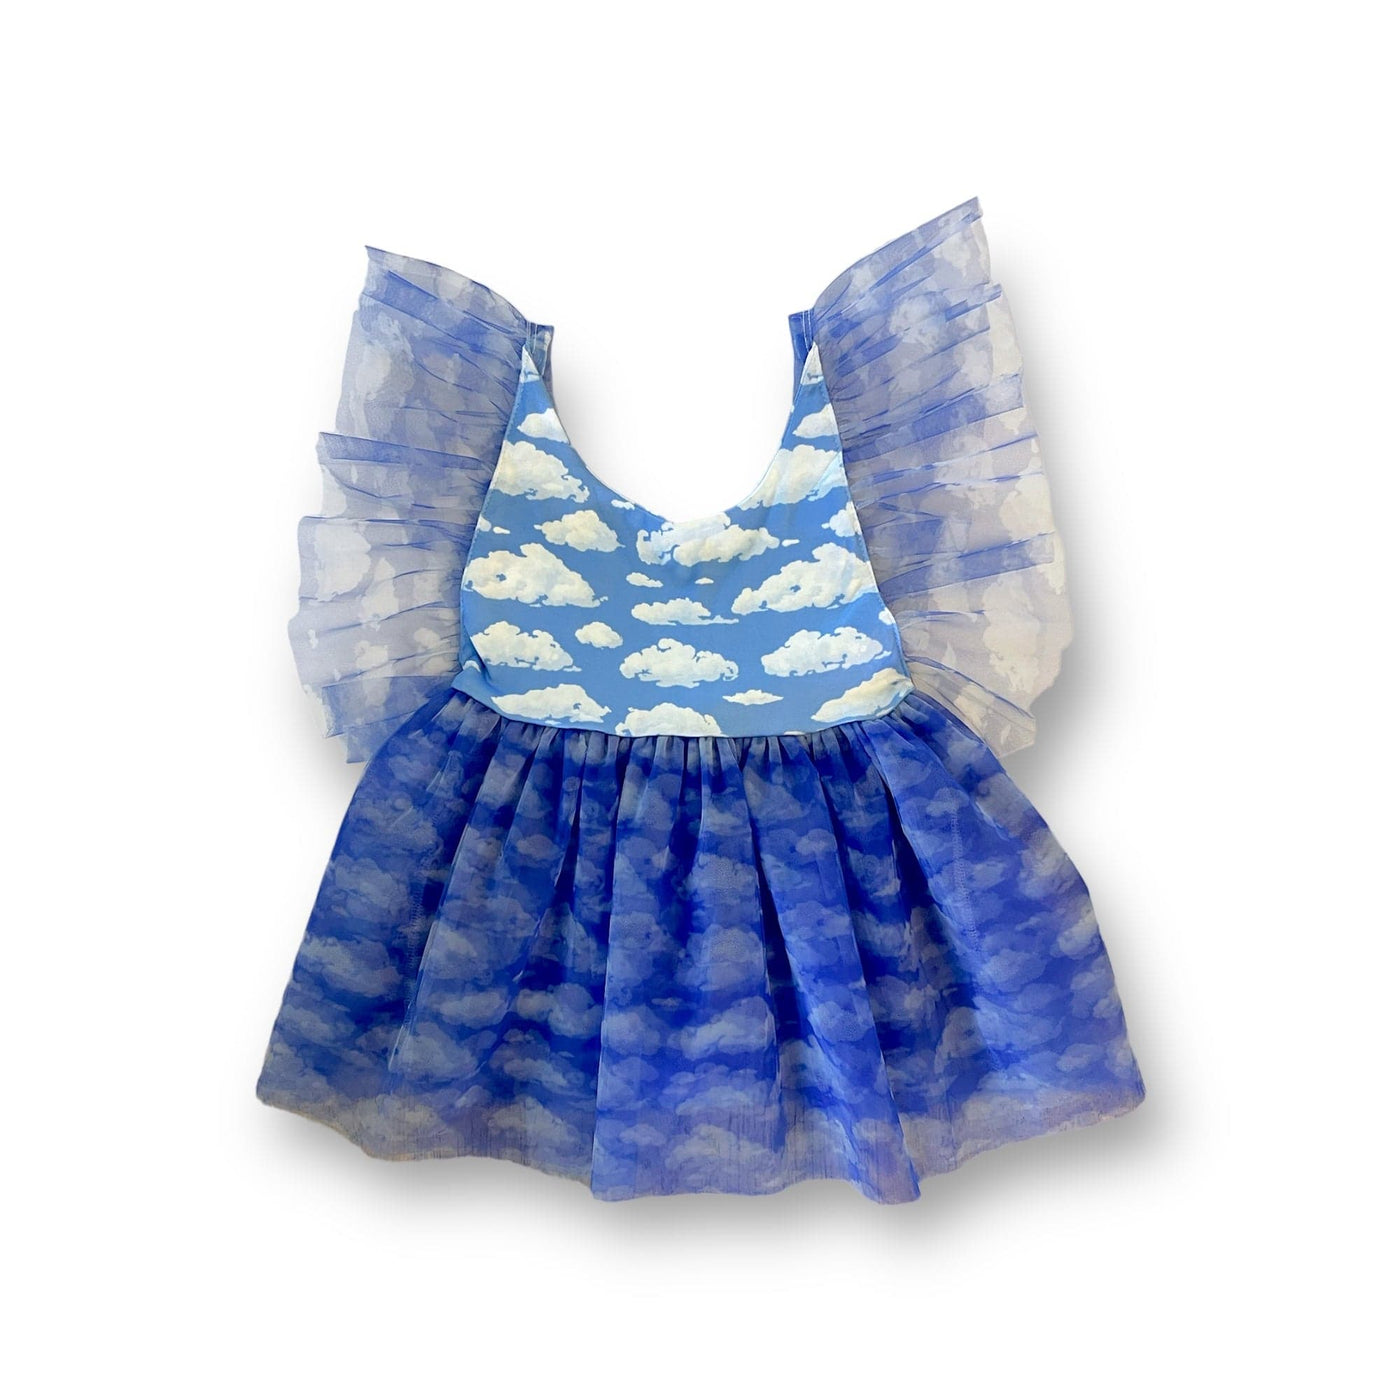 Best Day Ever Kids Baby & Toddler Dresses Daydream Ruffle Tunic buy online boutique kids clothing